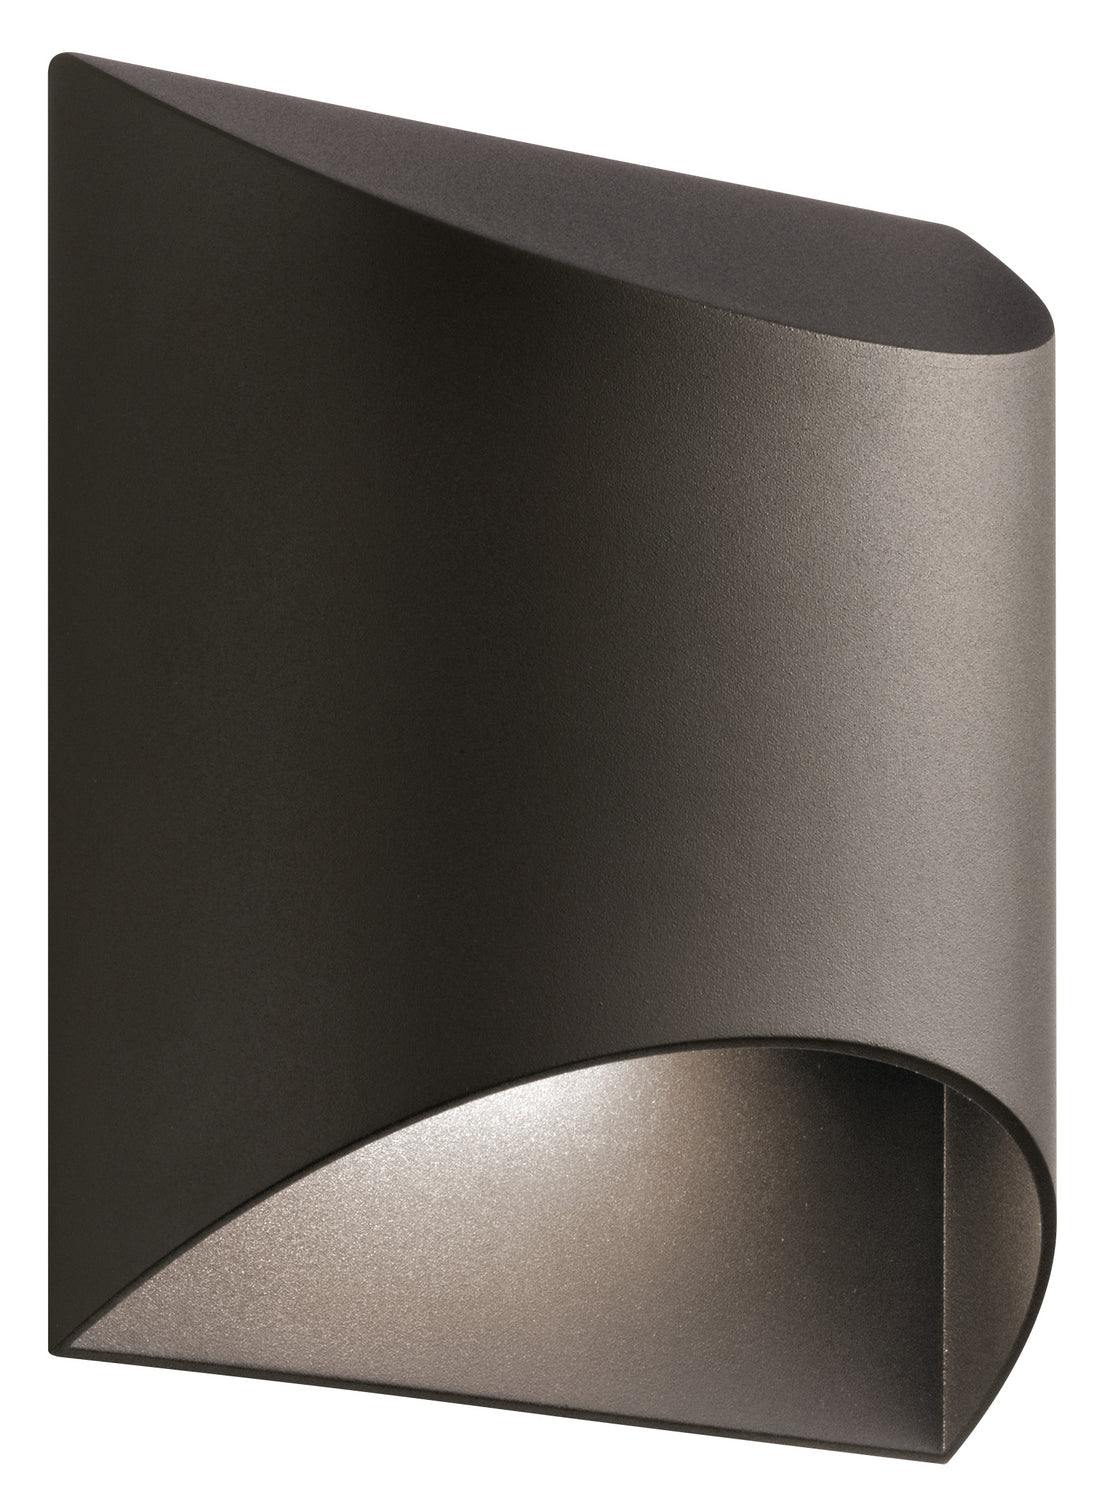 Kichler Canada - LED Outdoor Wall Mount - Wesley - Textured Architectural Bronze- Union Lighting Luminaires Decor